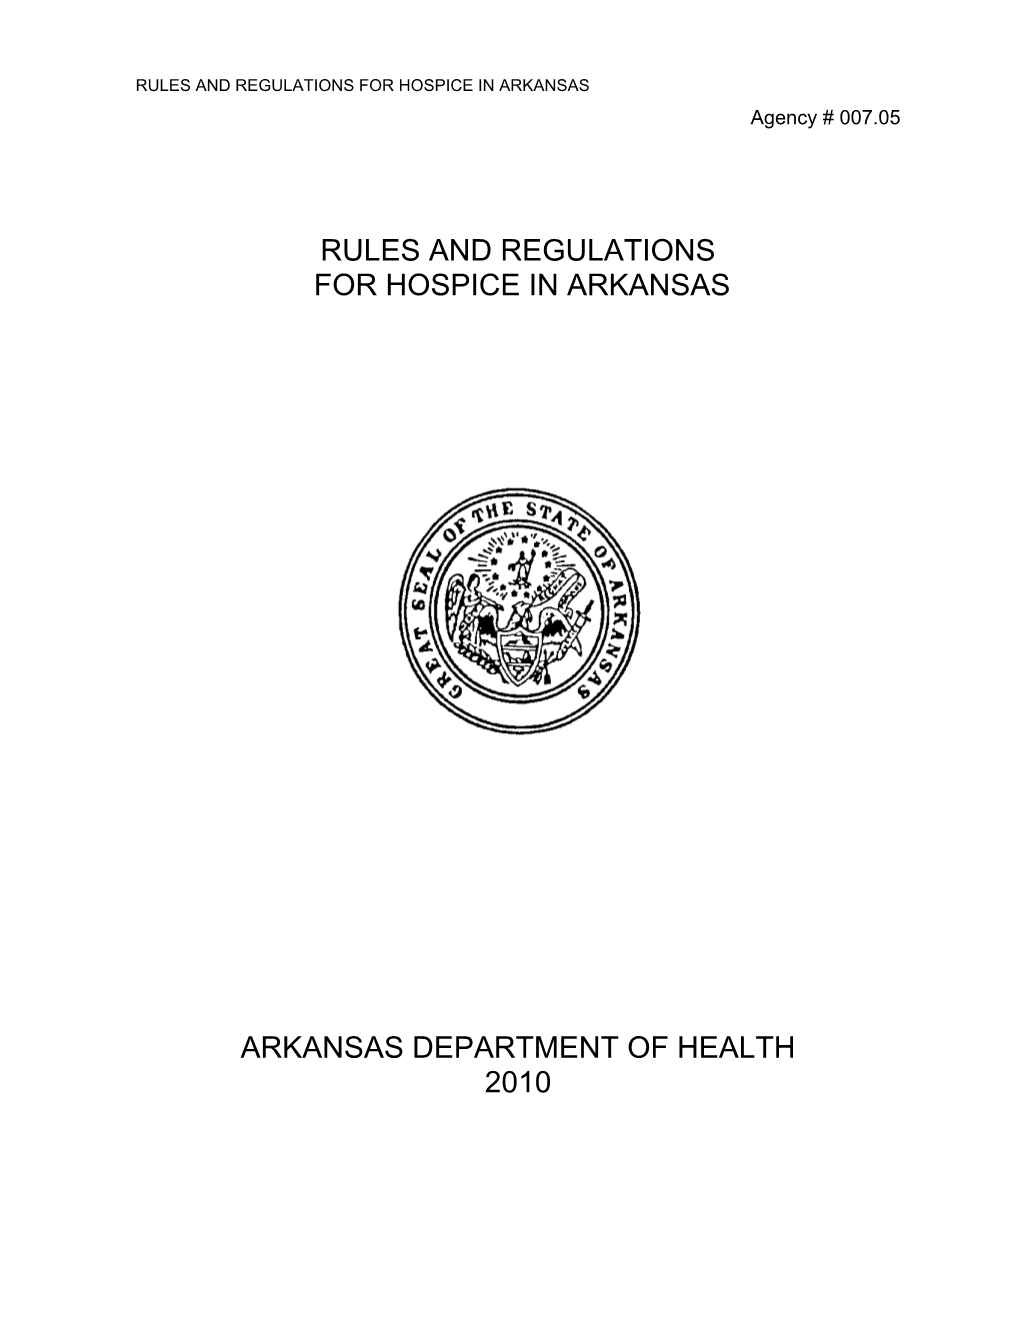 RULES and REGULATIONS for HOSPICE in ARKANSAS Agency # 007.05